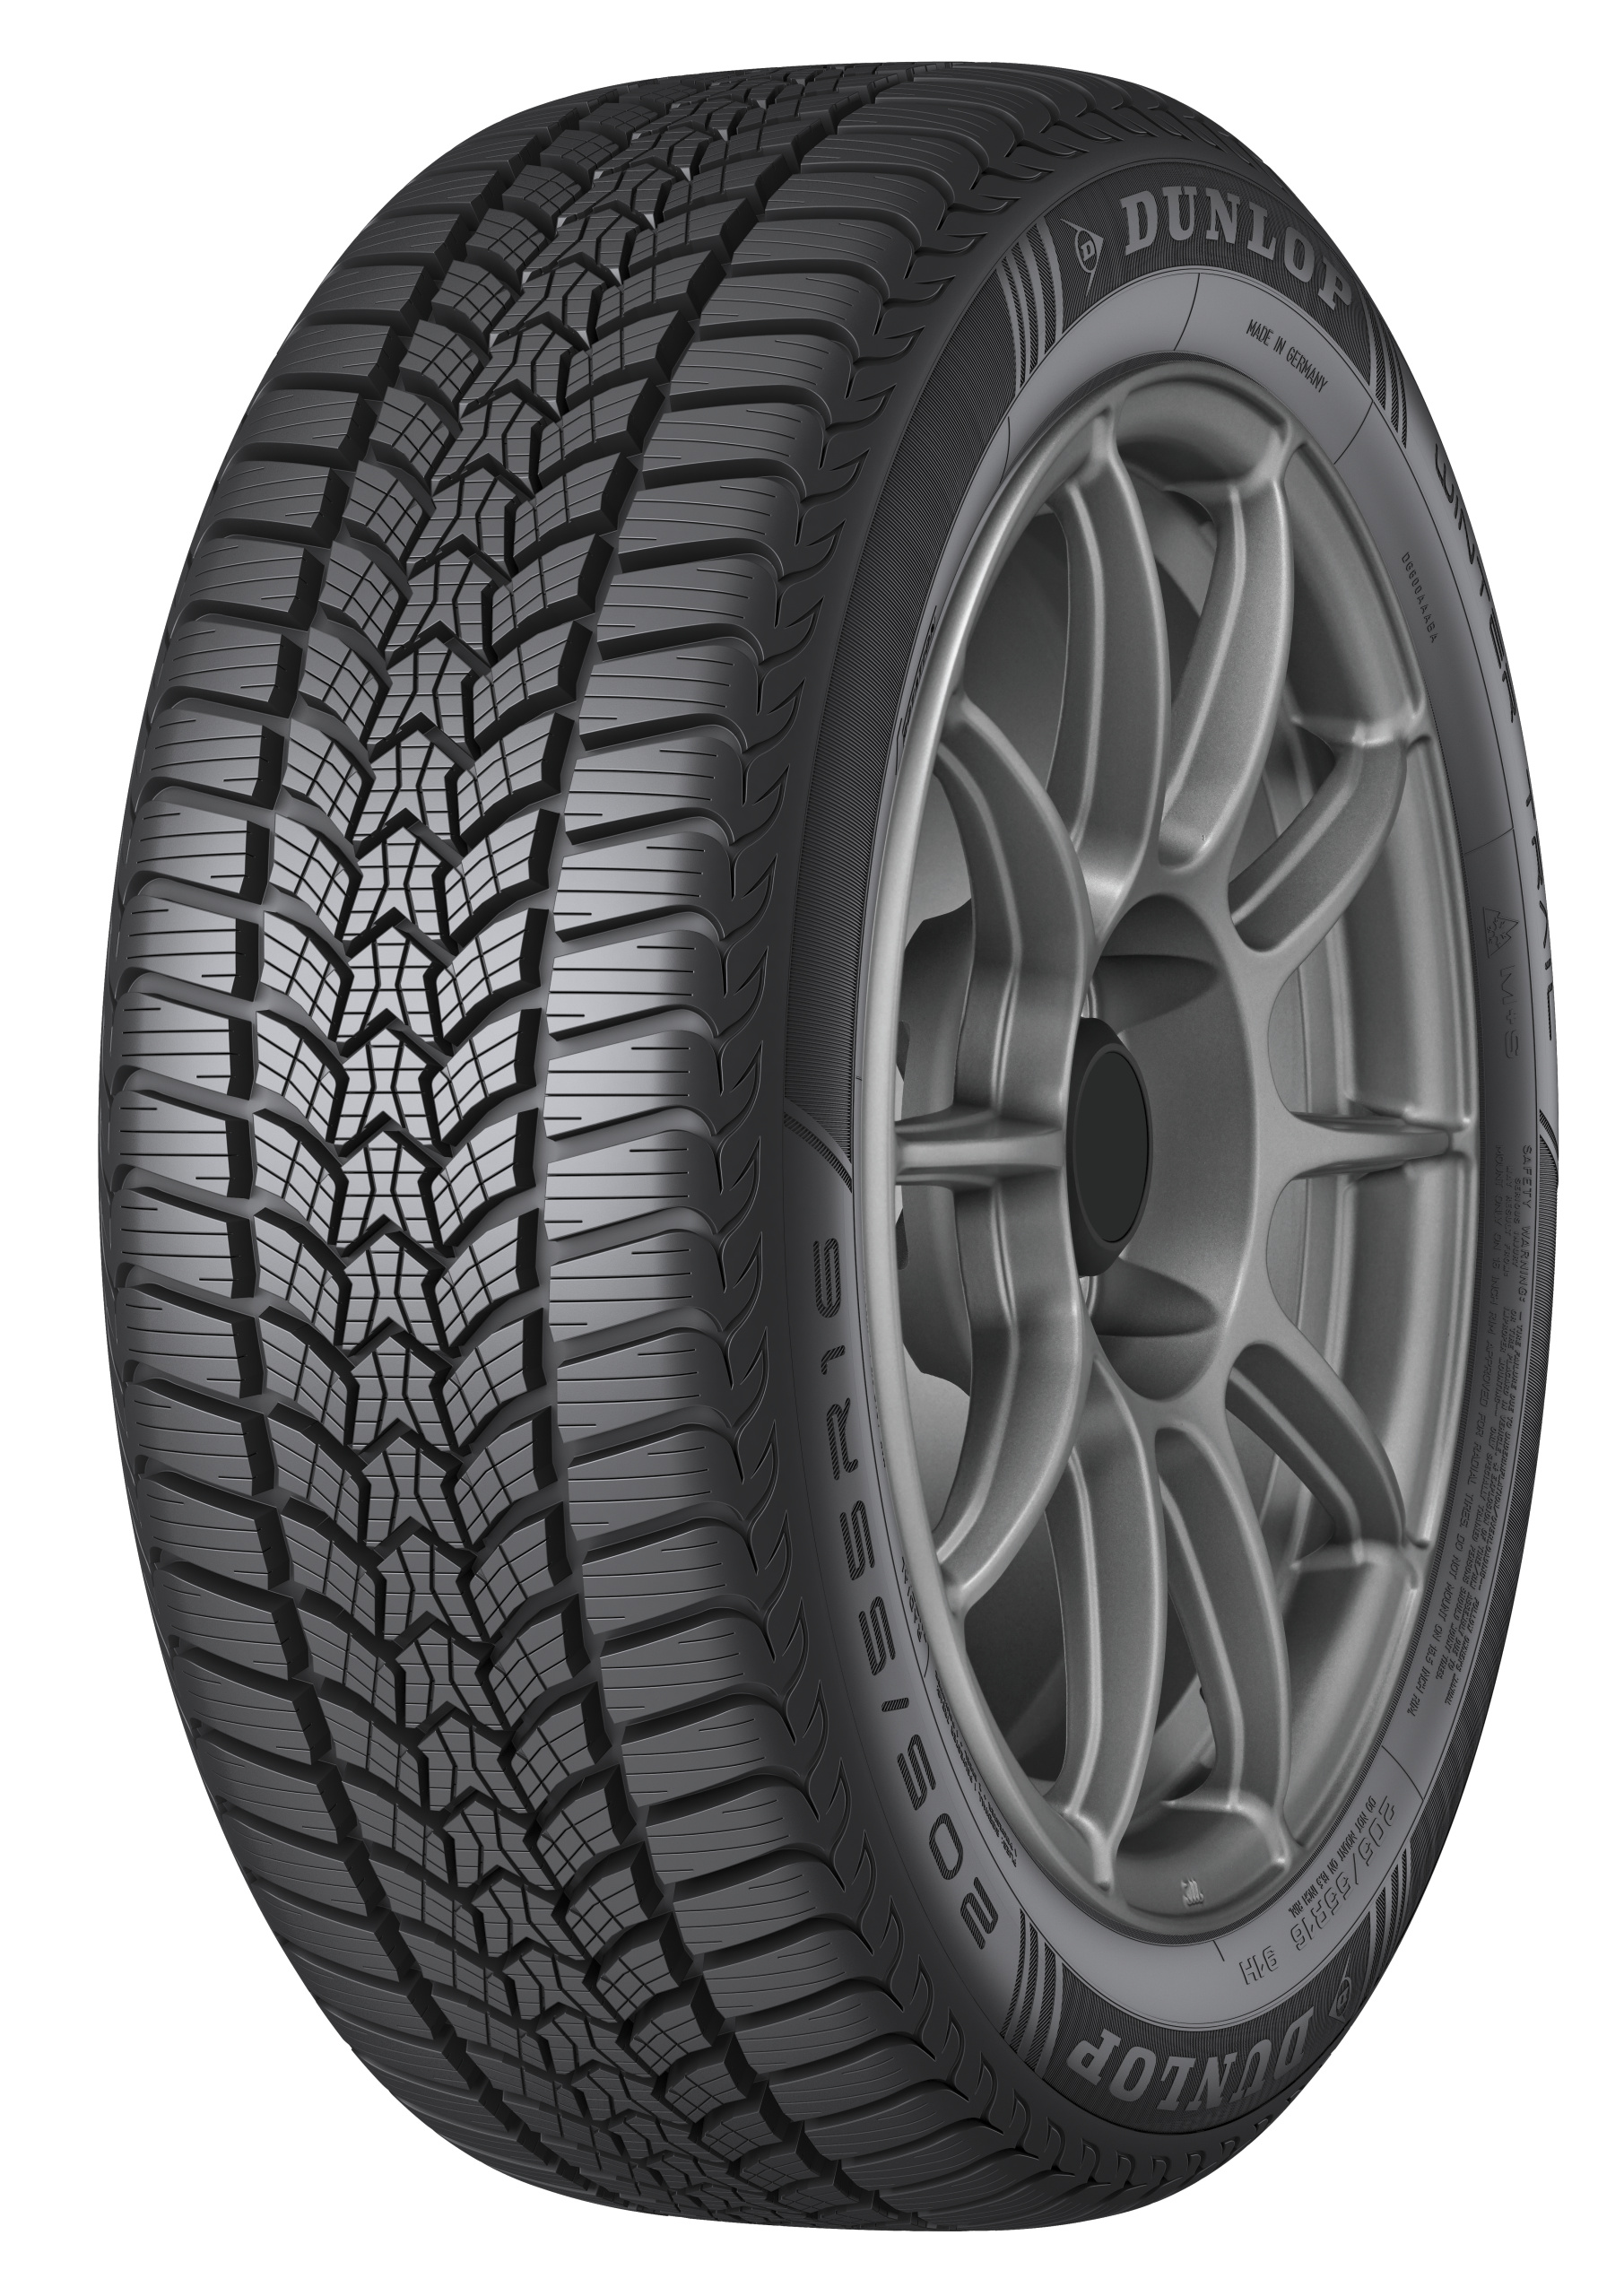 Gomme Nuove Dunlop 205/55 R16 91H WINTER TRAIL M+S pneumatici nuovi Invernale